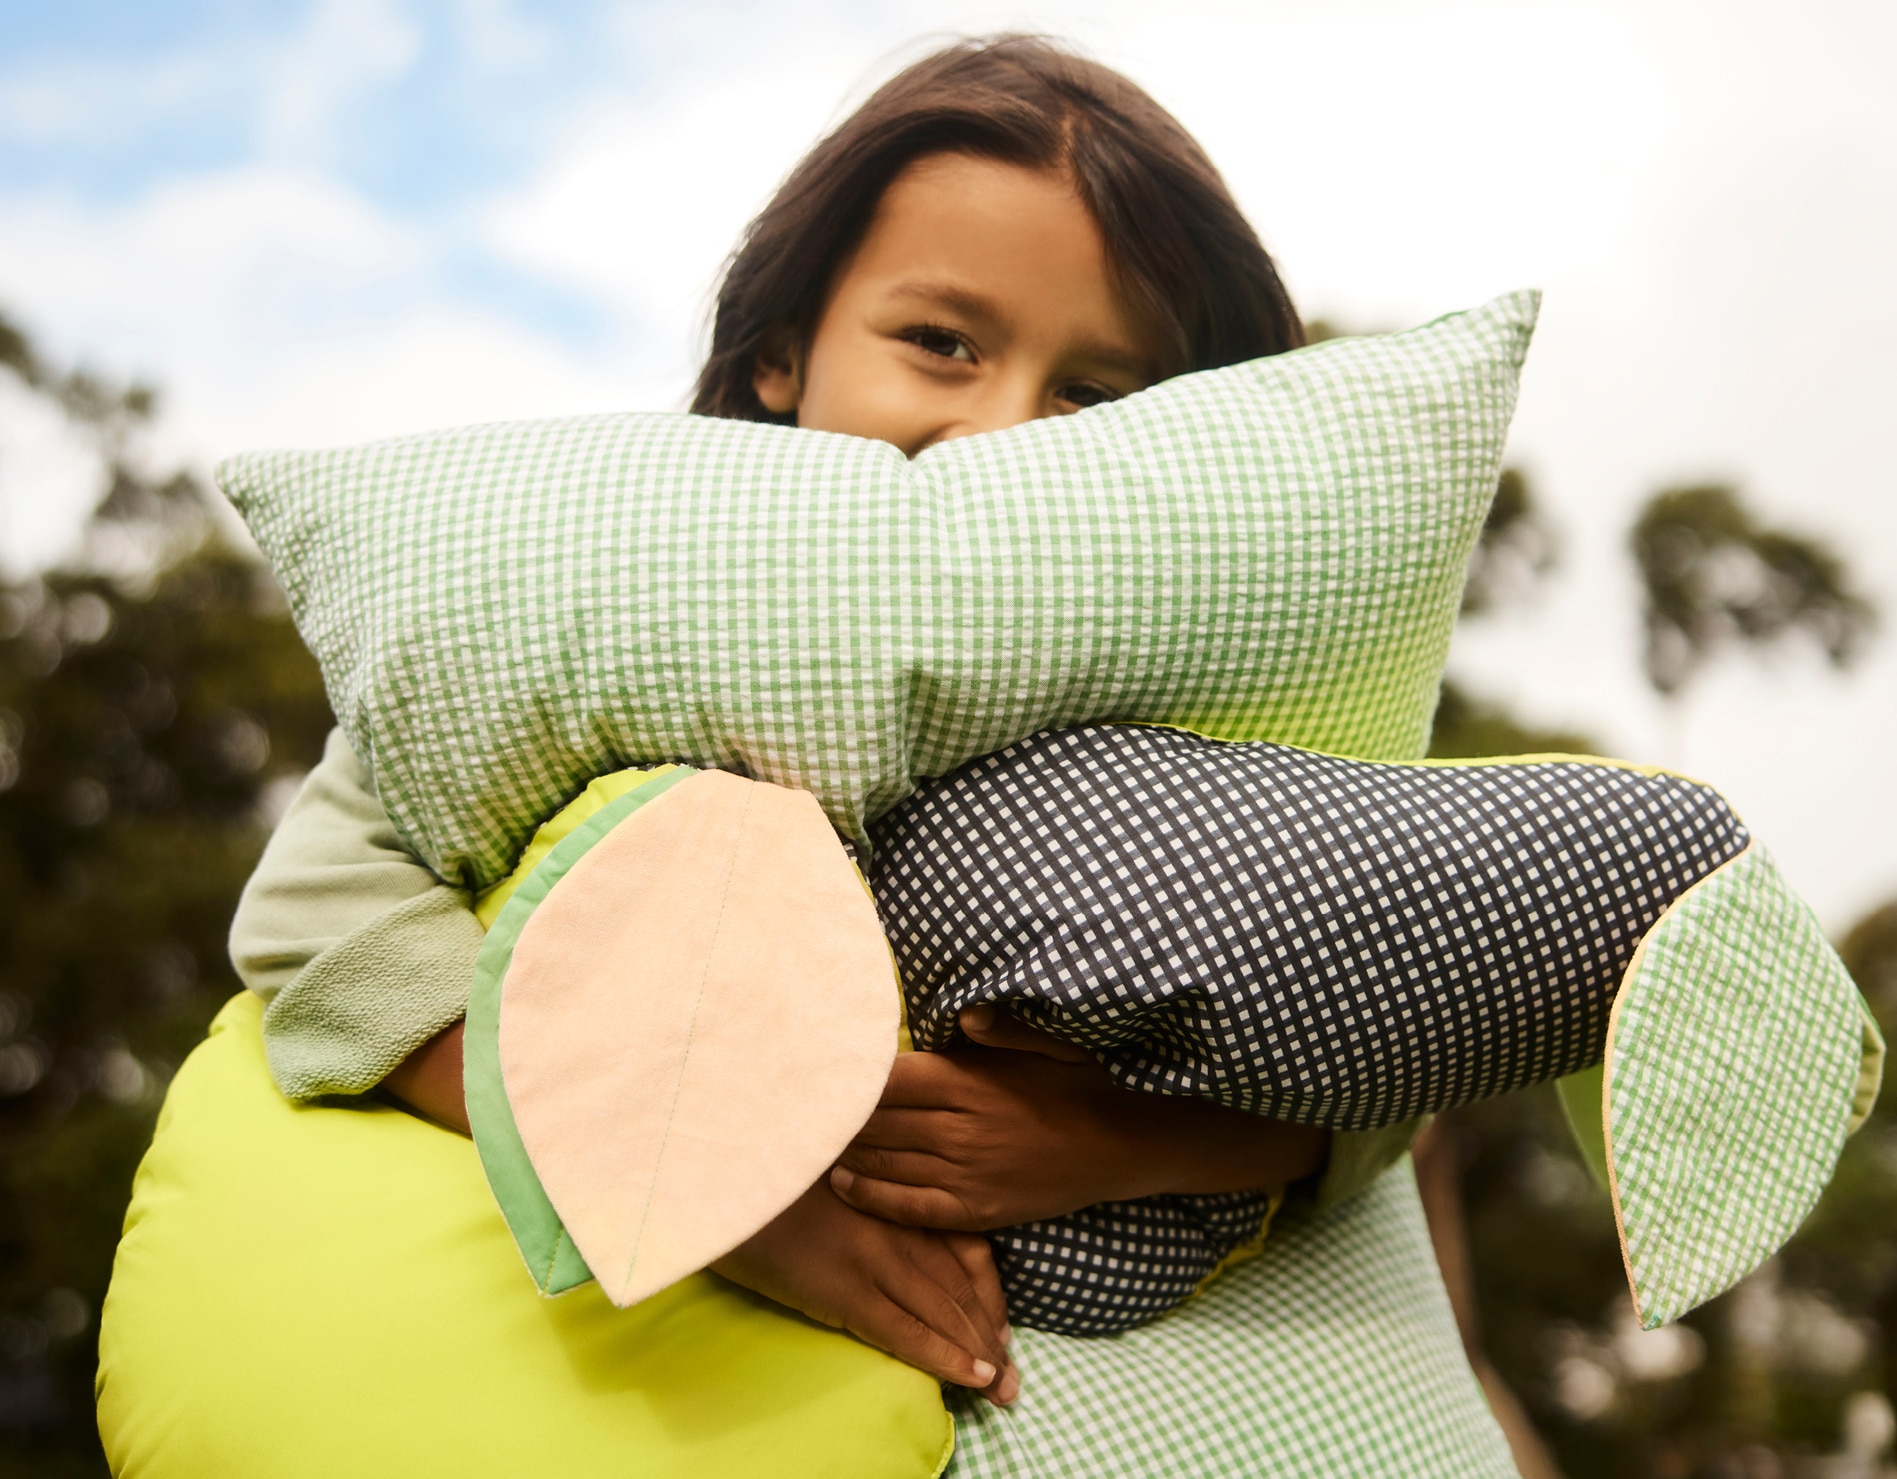 young boy, clutching a pile of decorative sheridan kids cushions, stands outside. half his face is shyly hiding behind the cushions, though you can tell he's smiling. background of trees, blue sky and clouds, out of focus.